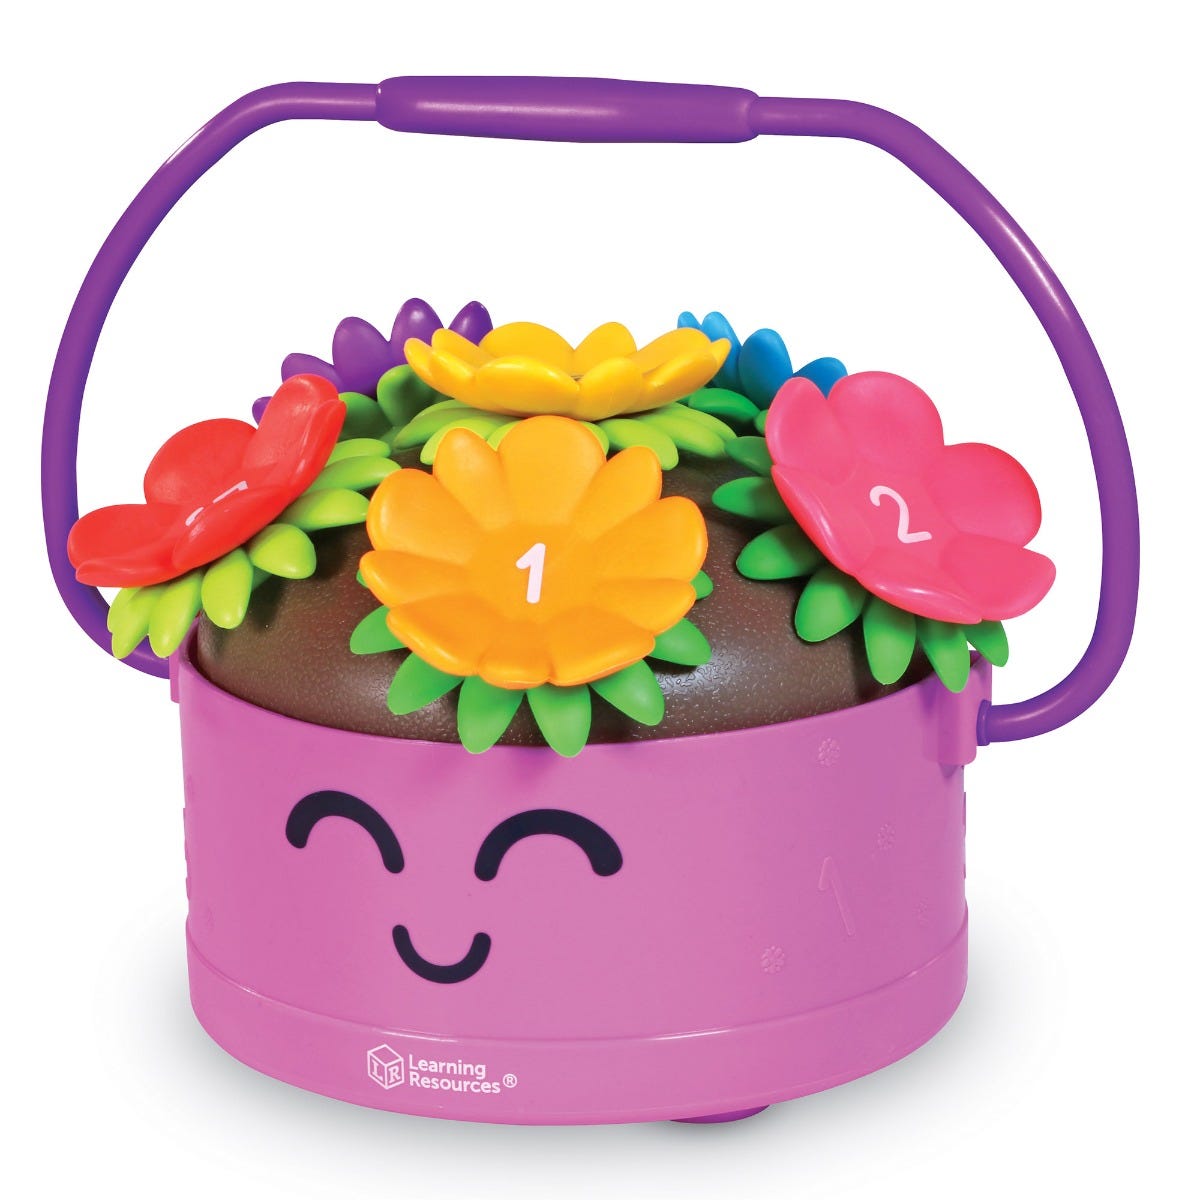 Poppy The Count & Stack Flower Pot, Meet Poppy and her 6 colourful count-and-stack-flowers! They're ready for preschool fine motor fun. Stack Poppy’s 2-piece flowers, then count them up with this flower pot toy. As they pick Poppy’s flowers or carry her around with her child-sized handle, toddlers and preschoolers build new skills during imaginative play adventures. Learning fun is always in bloom with Poppy and her colourful flowers. Poppy The Count & Stack Flower Pot Whether they're learning in preschool 